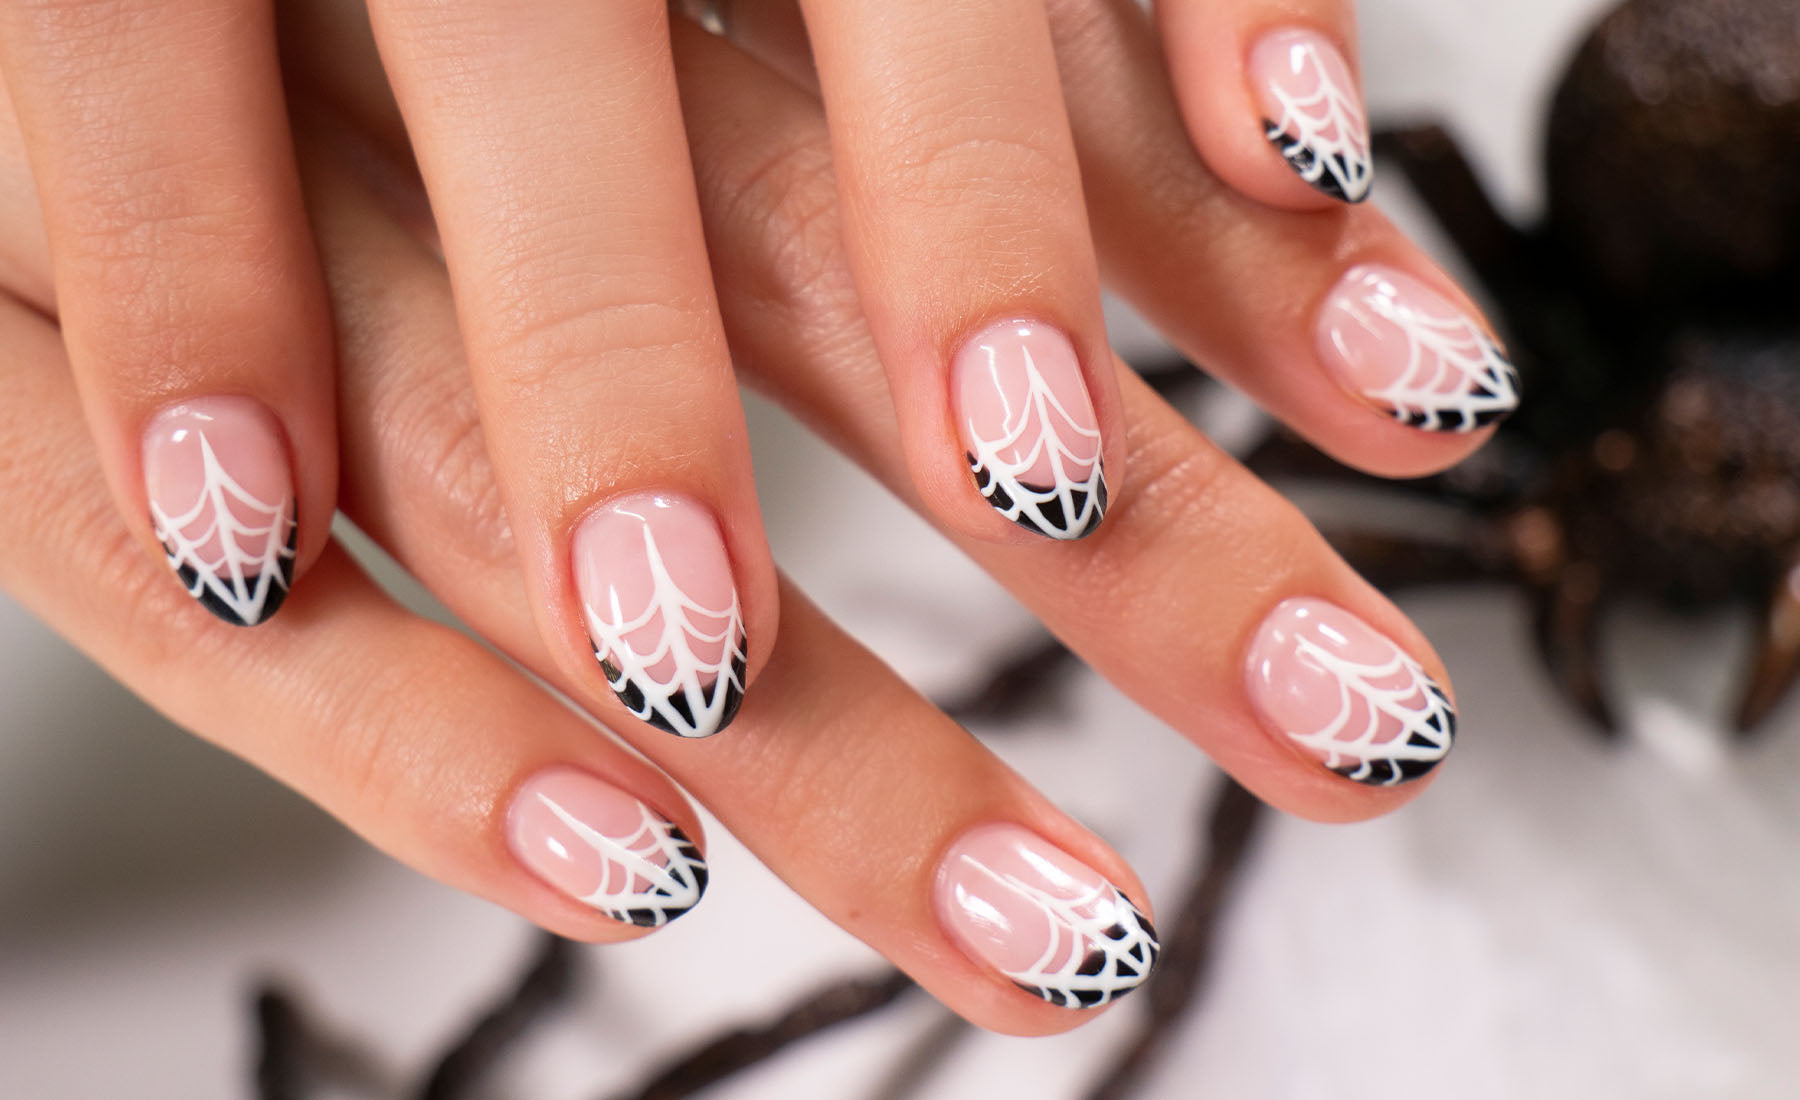 13 Halloween Nail Designs That Are Spooky & Glam